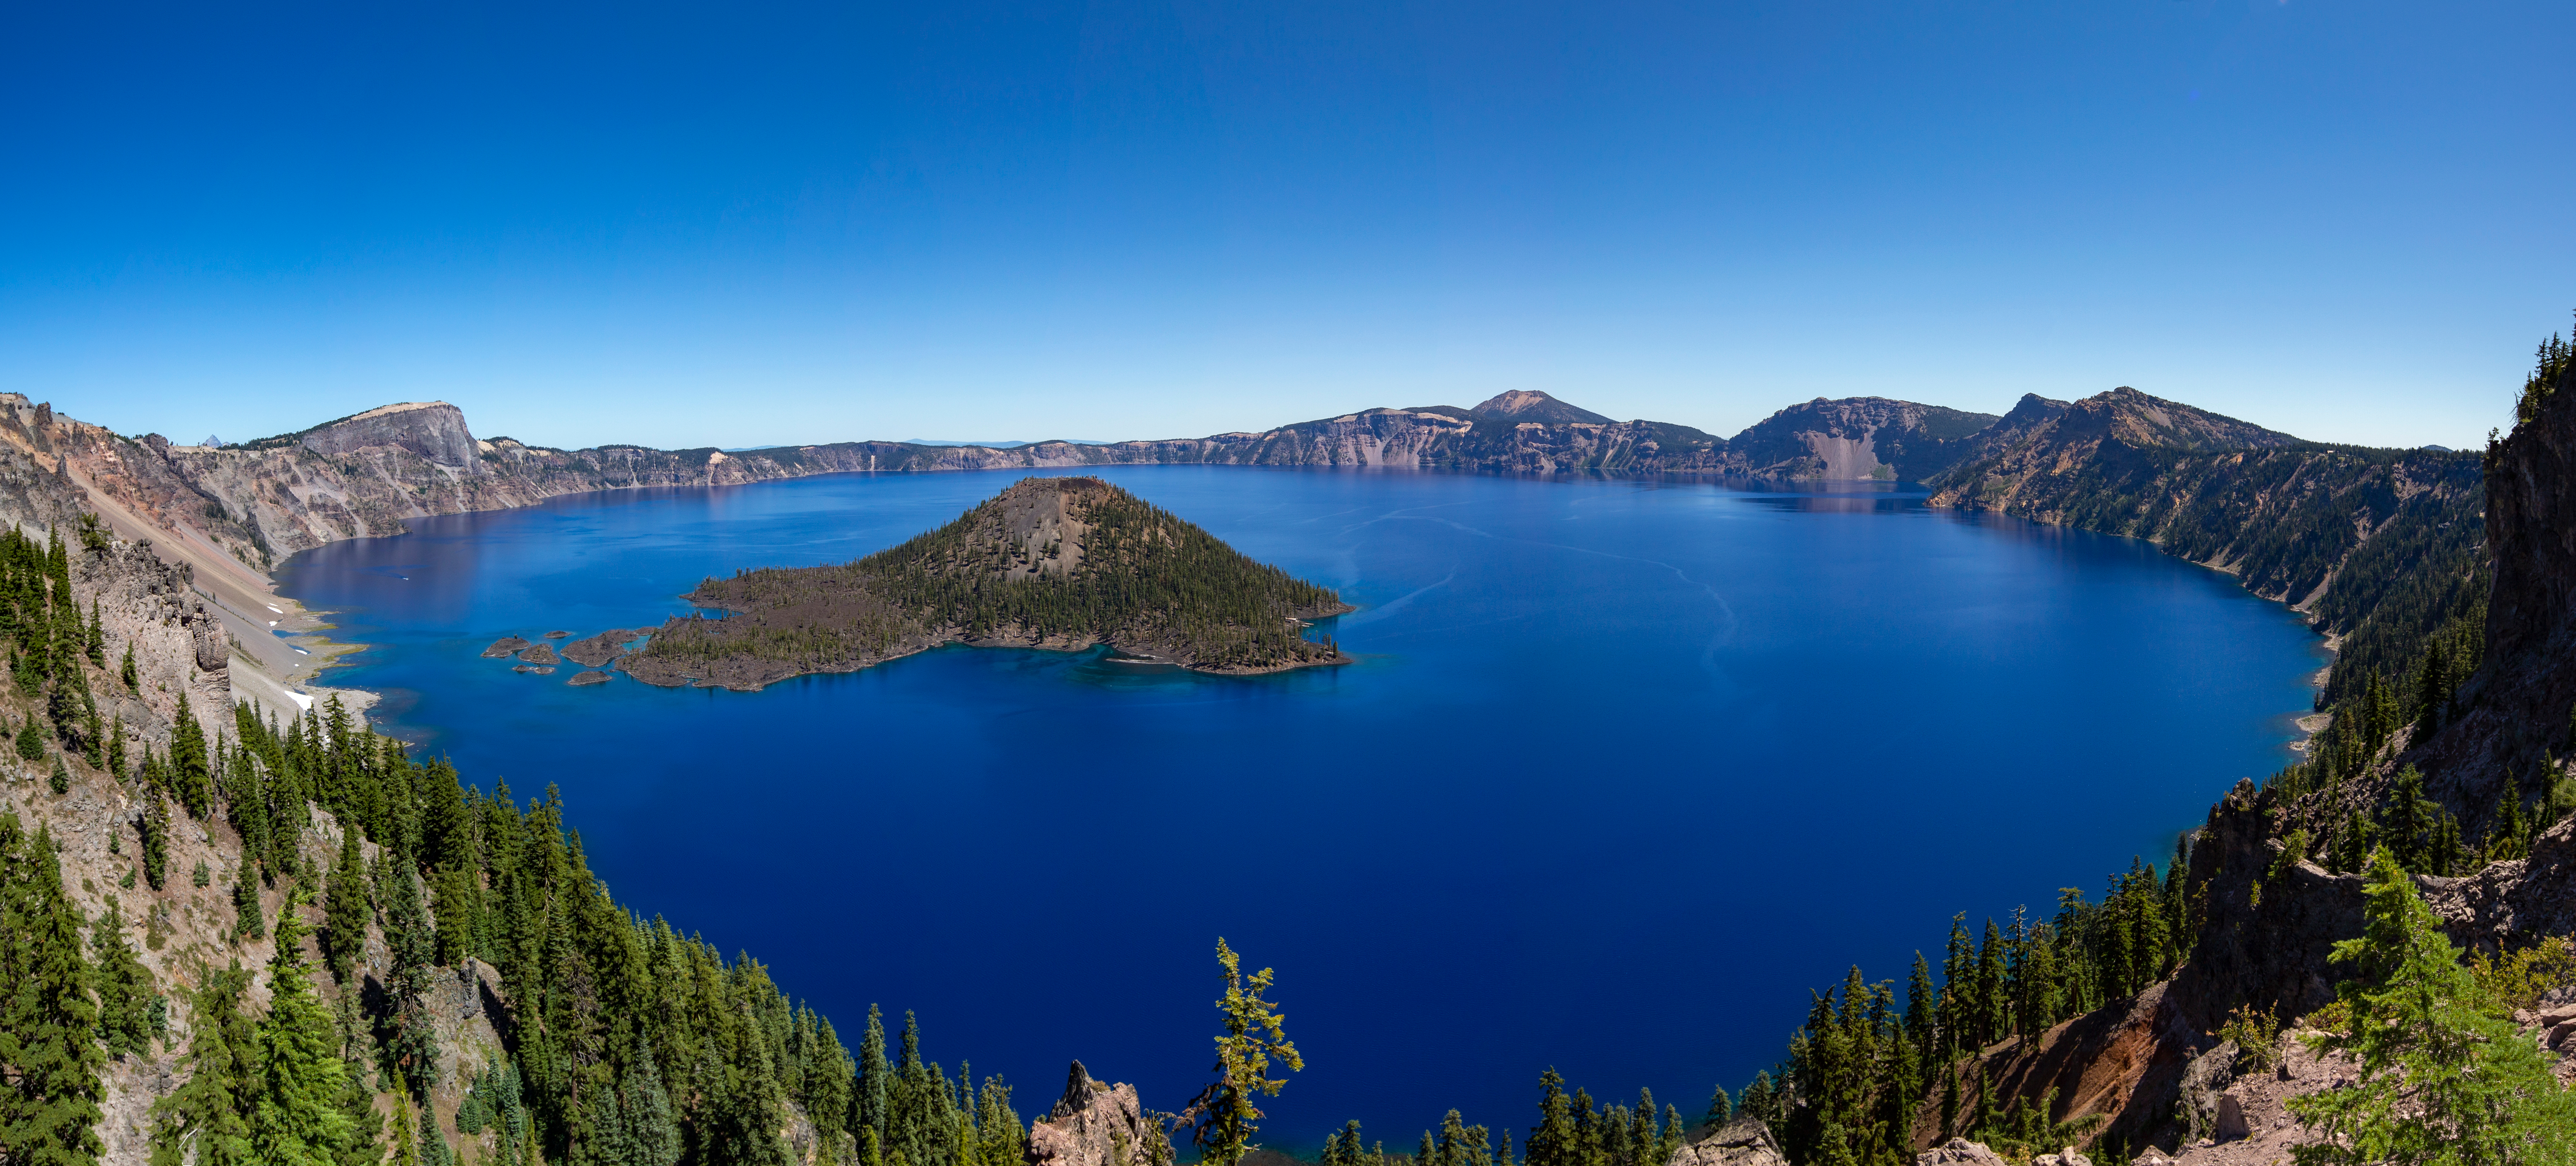 Crater Lake National Park, trees, forest, wizard island